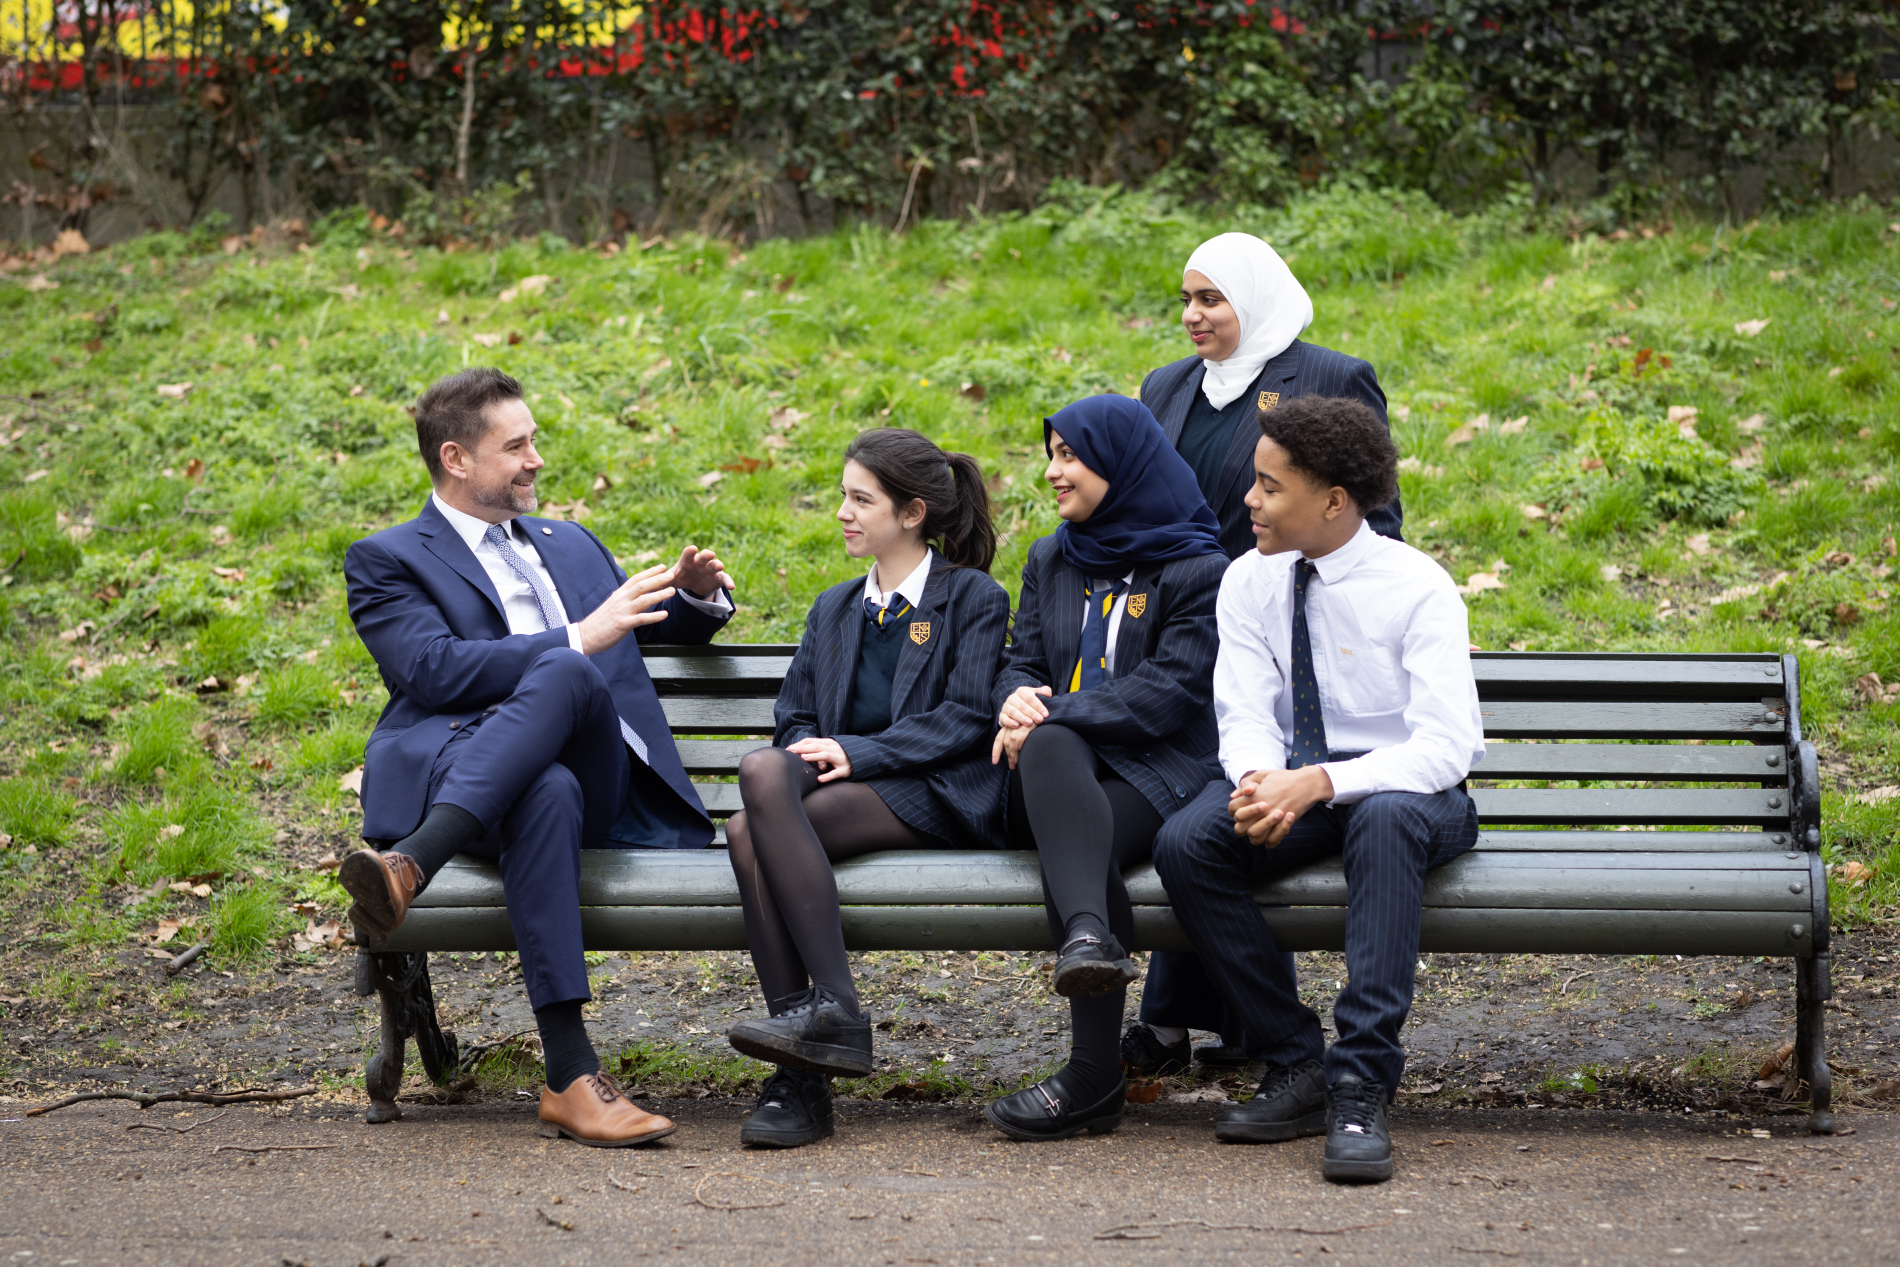 Male teacher talking to pupils on bench